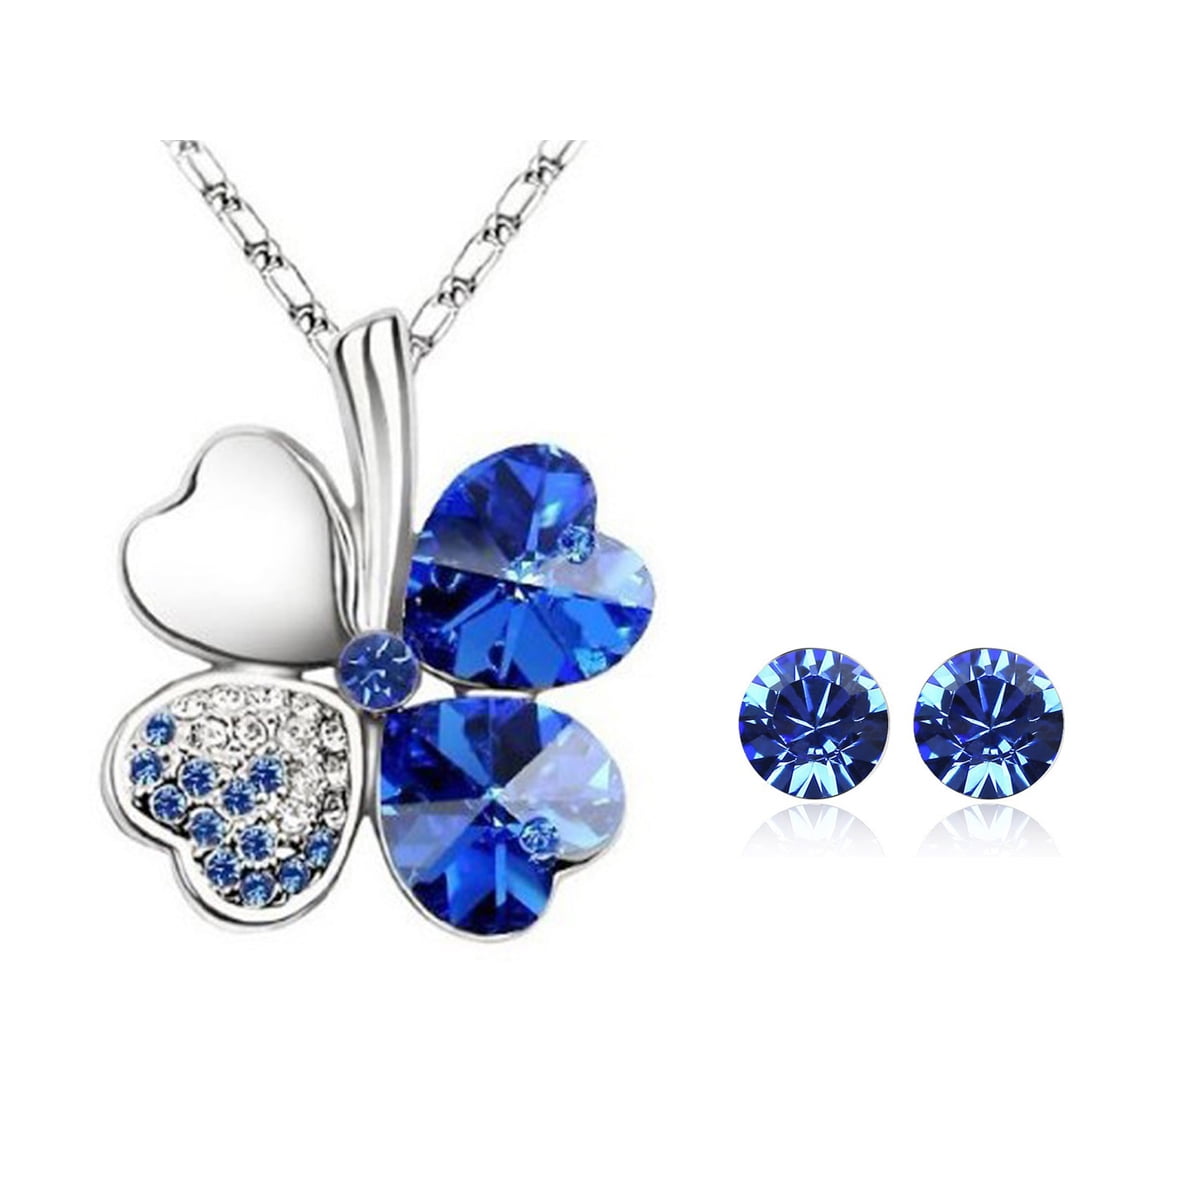 NEWNOVE Heart of Ocean Pendant Necklaces for Women | WOW Her !